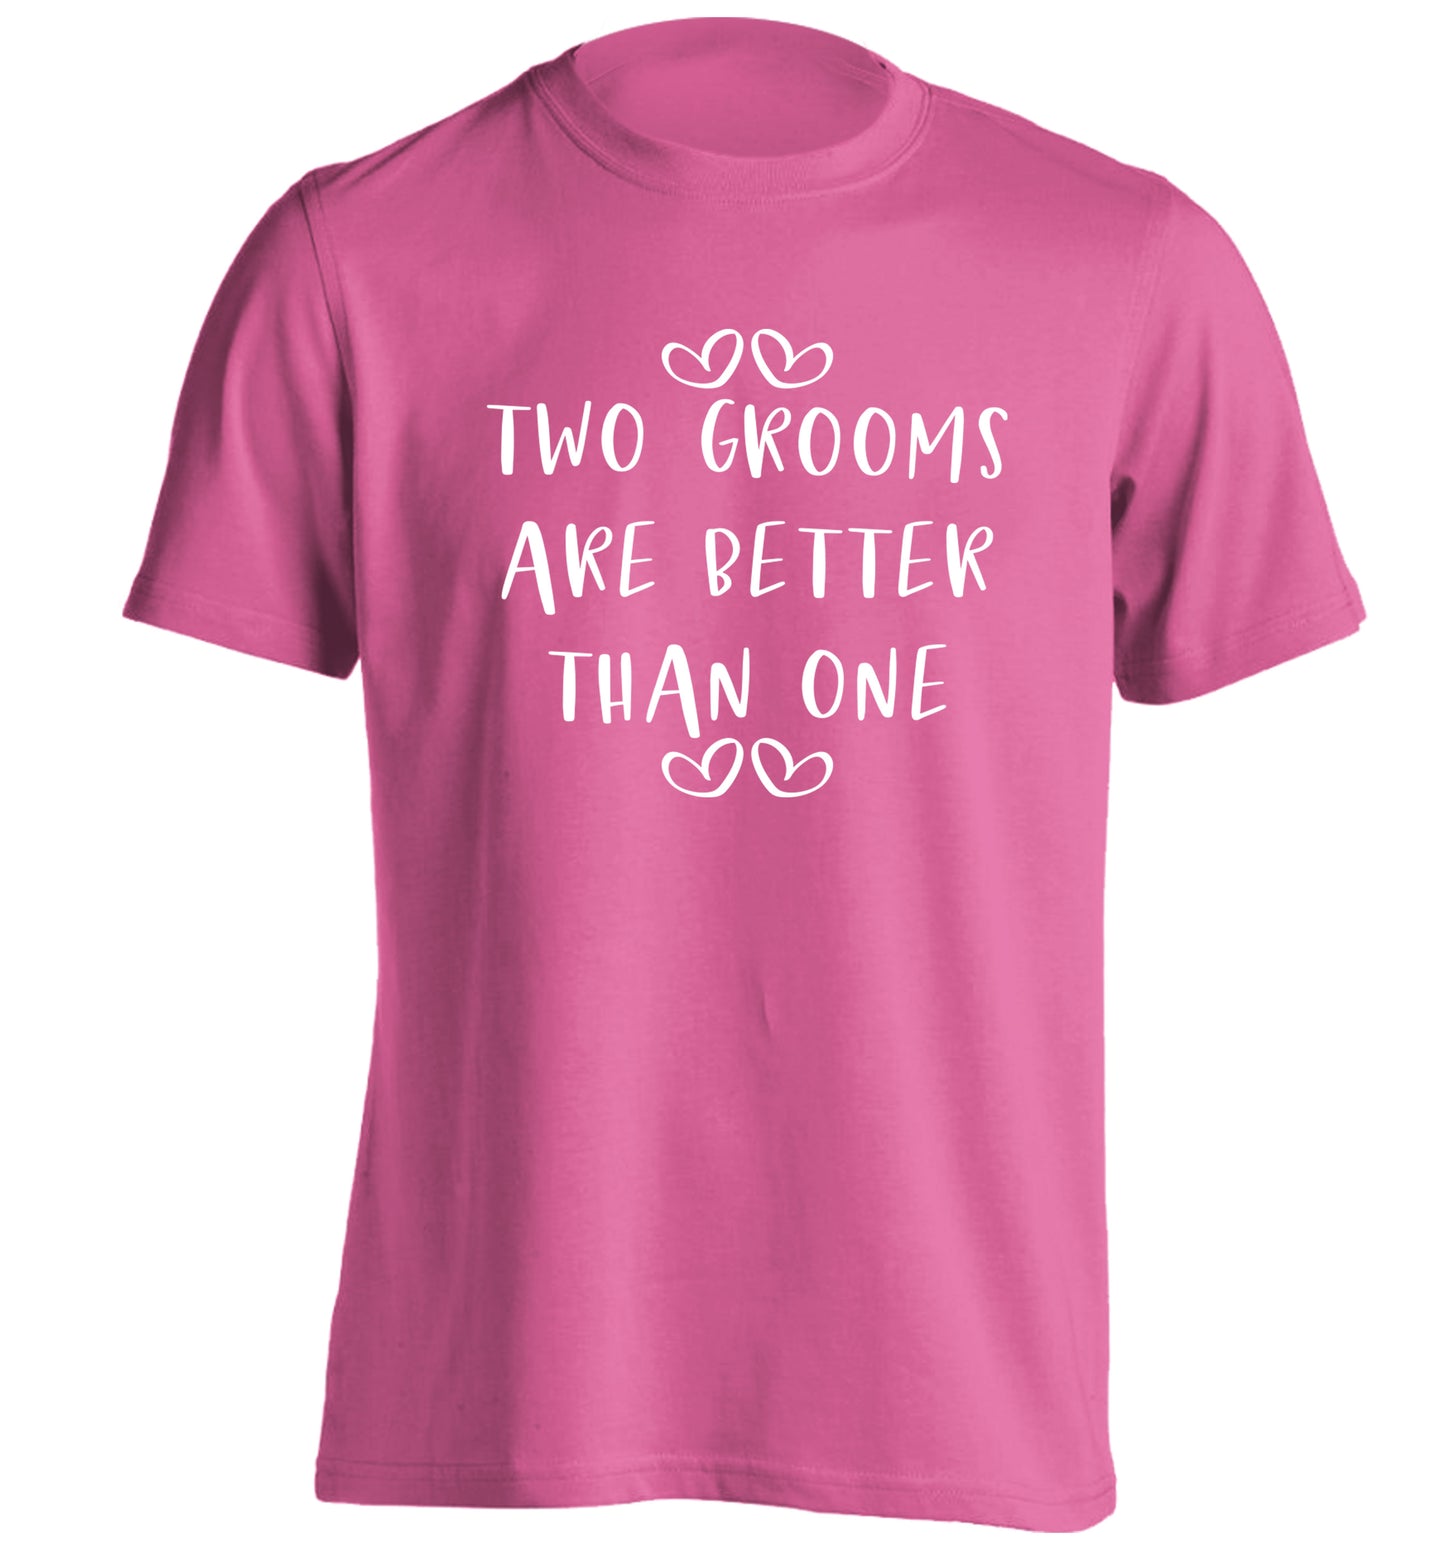 Two grooms are better than one adults unisex pink Tshirt 2XL